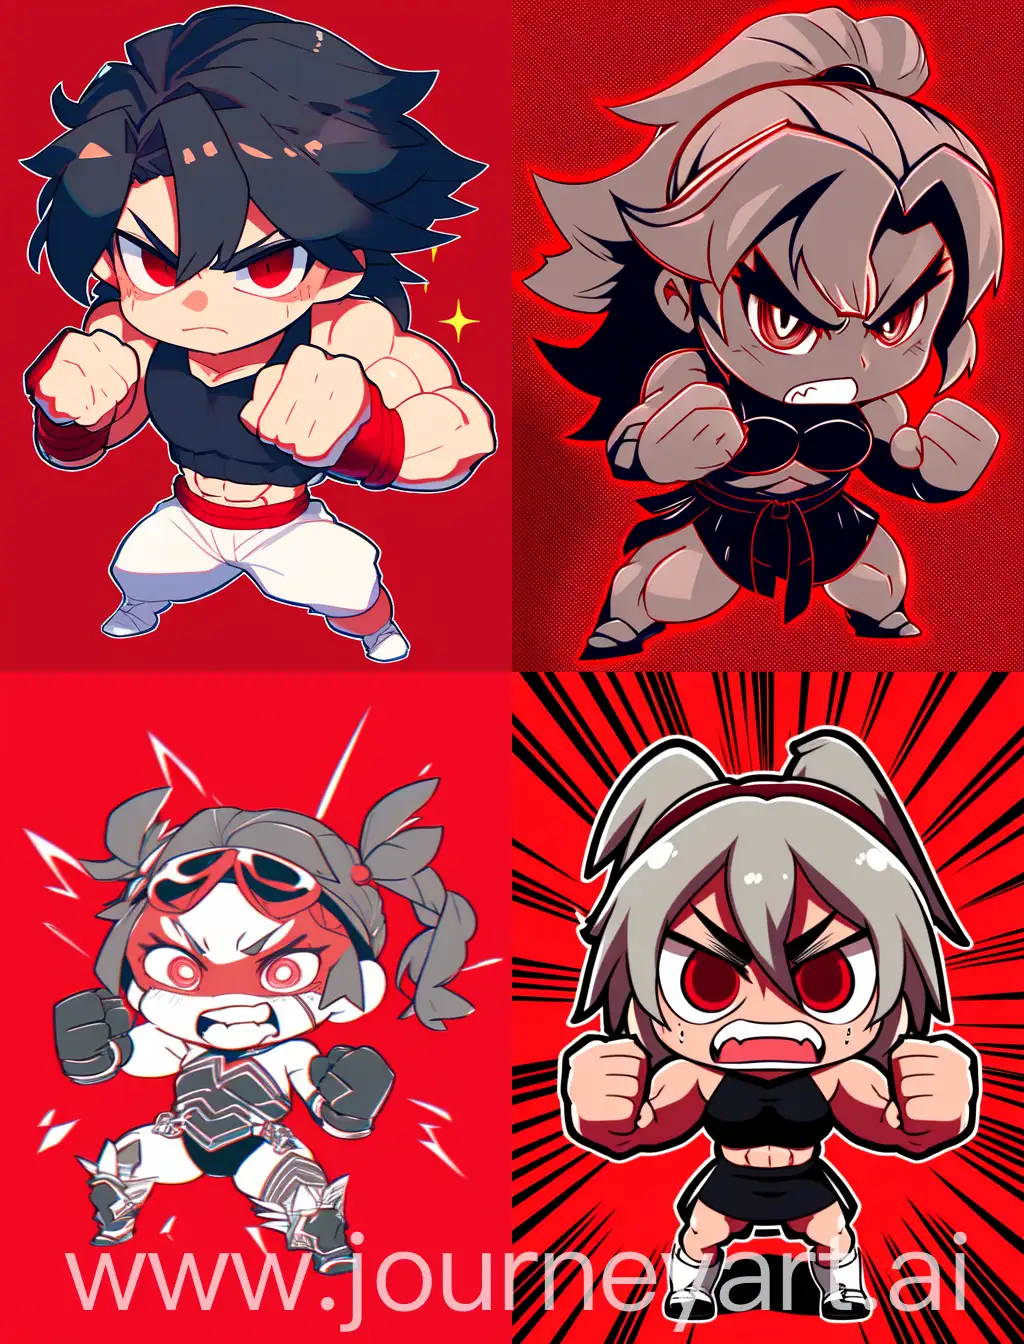 angry chibi anime girl showing muscles, cartoon anime style, with strong lines, with red solid background